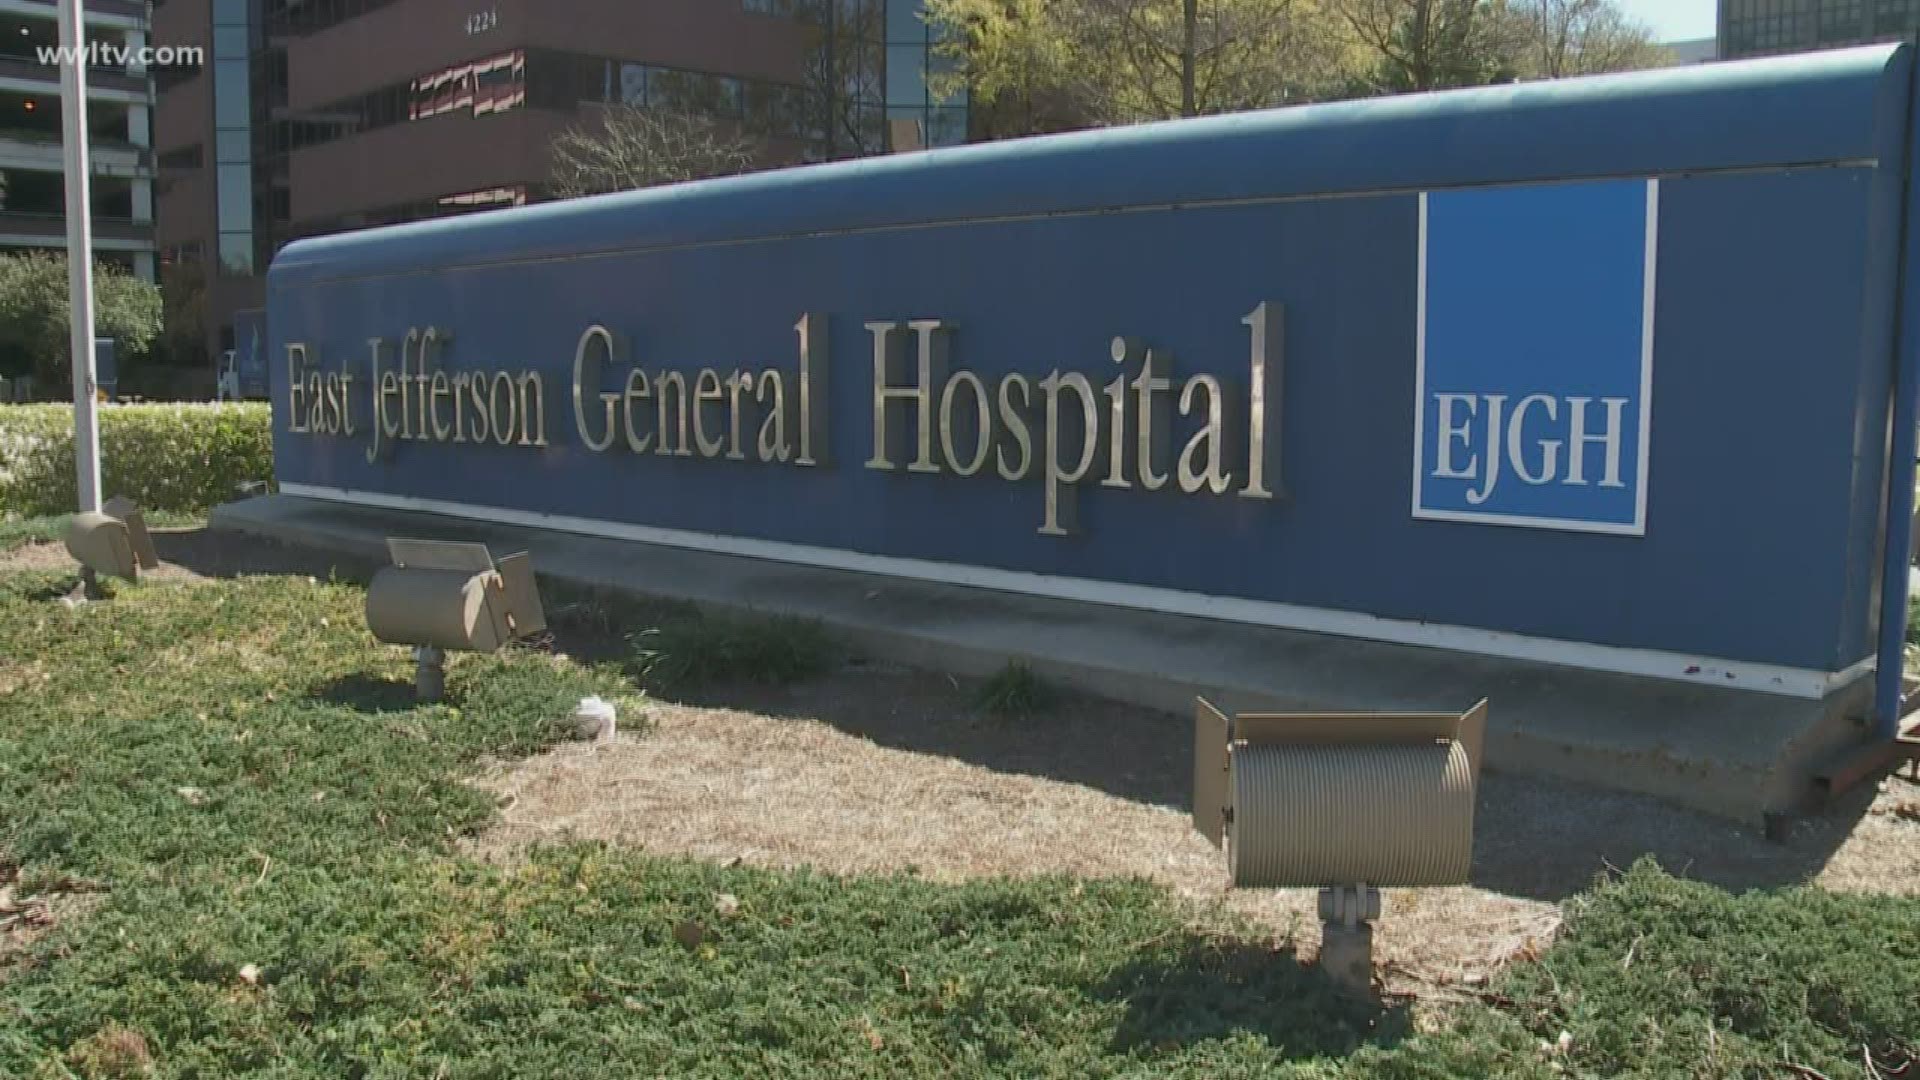 LCMC, which runs Children's Hospital, Touro Infirmary, West Jefferson Medical Center and the University Medical Center, offered to pay $90 million for the hospital